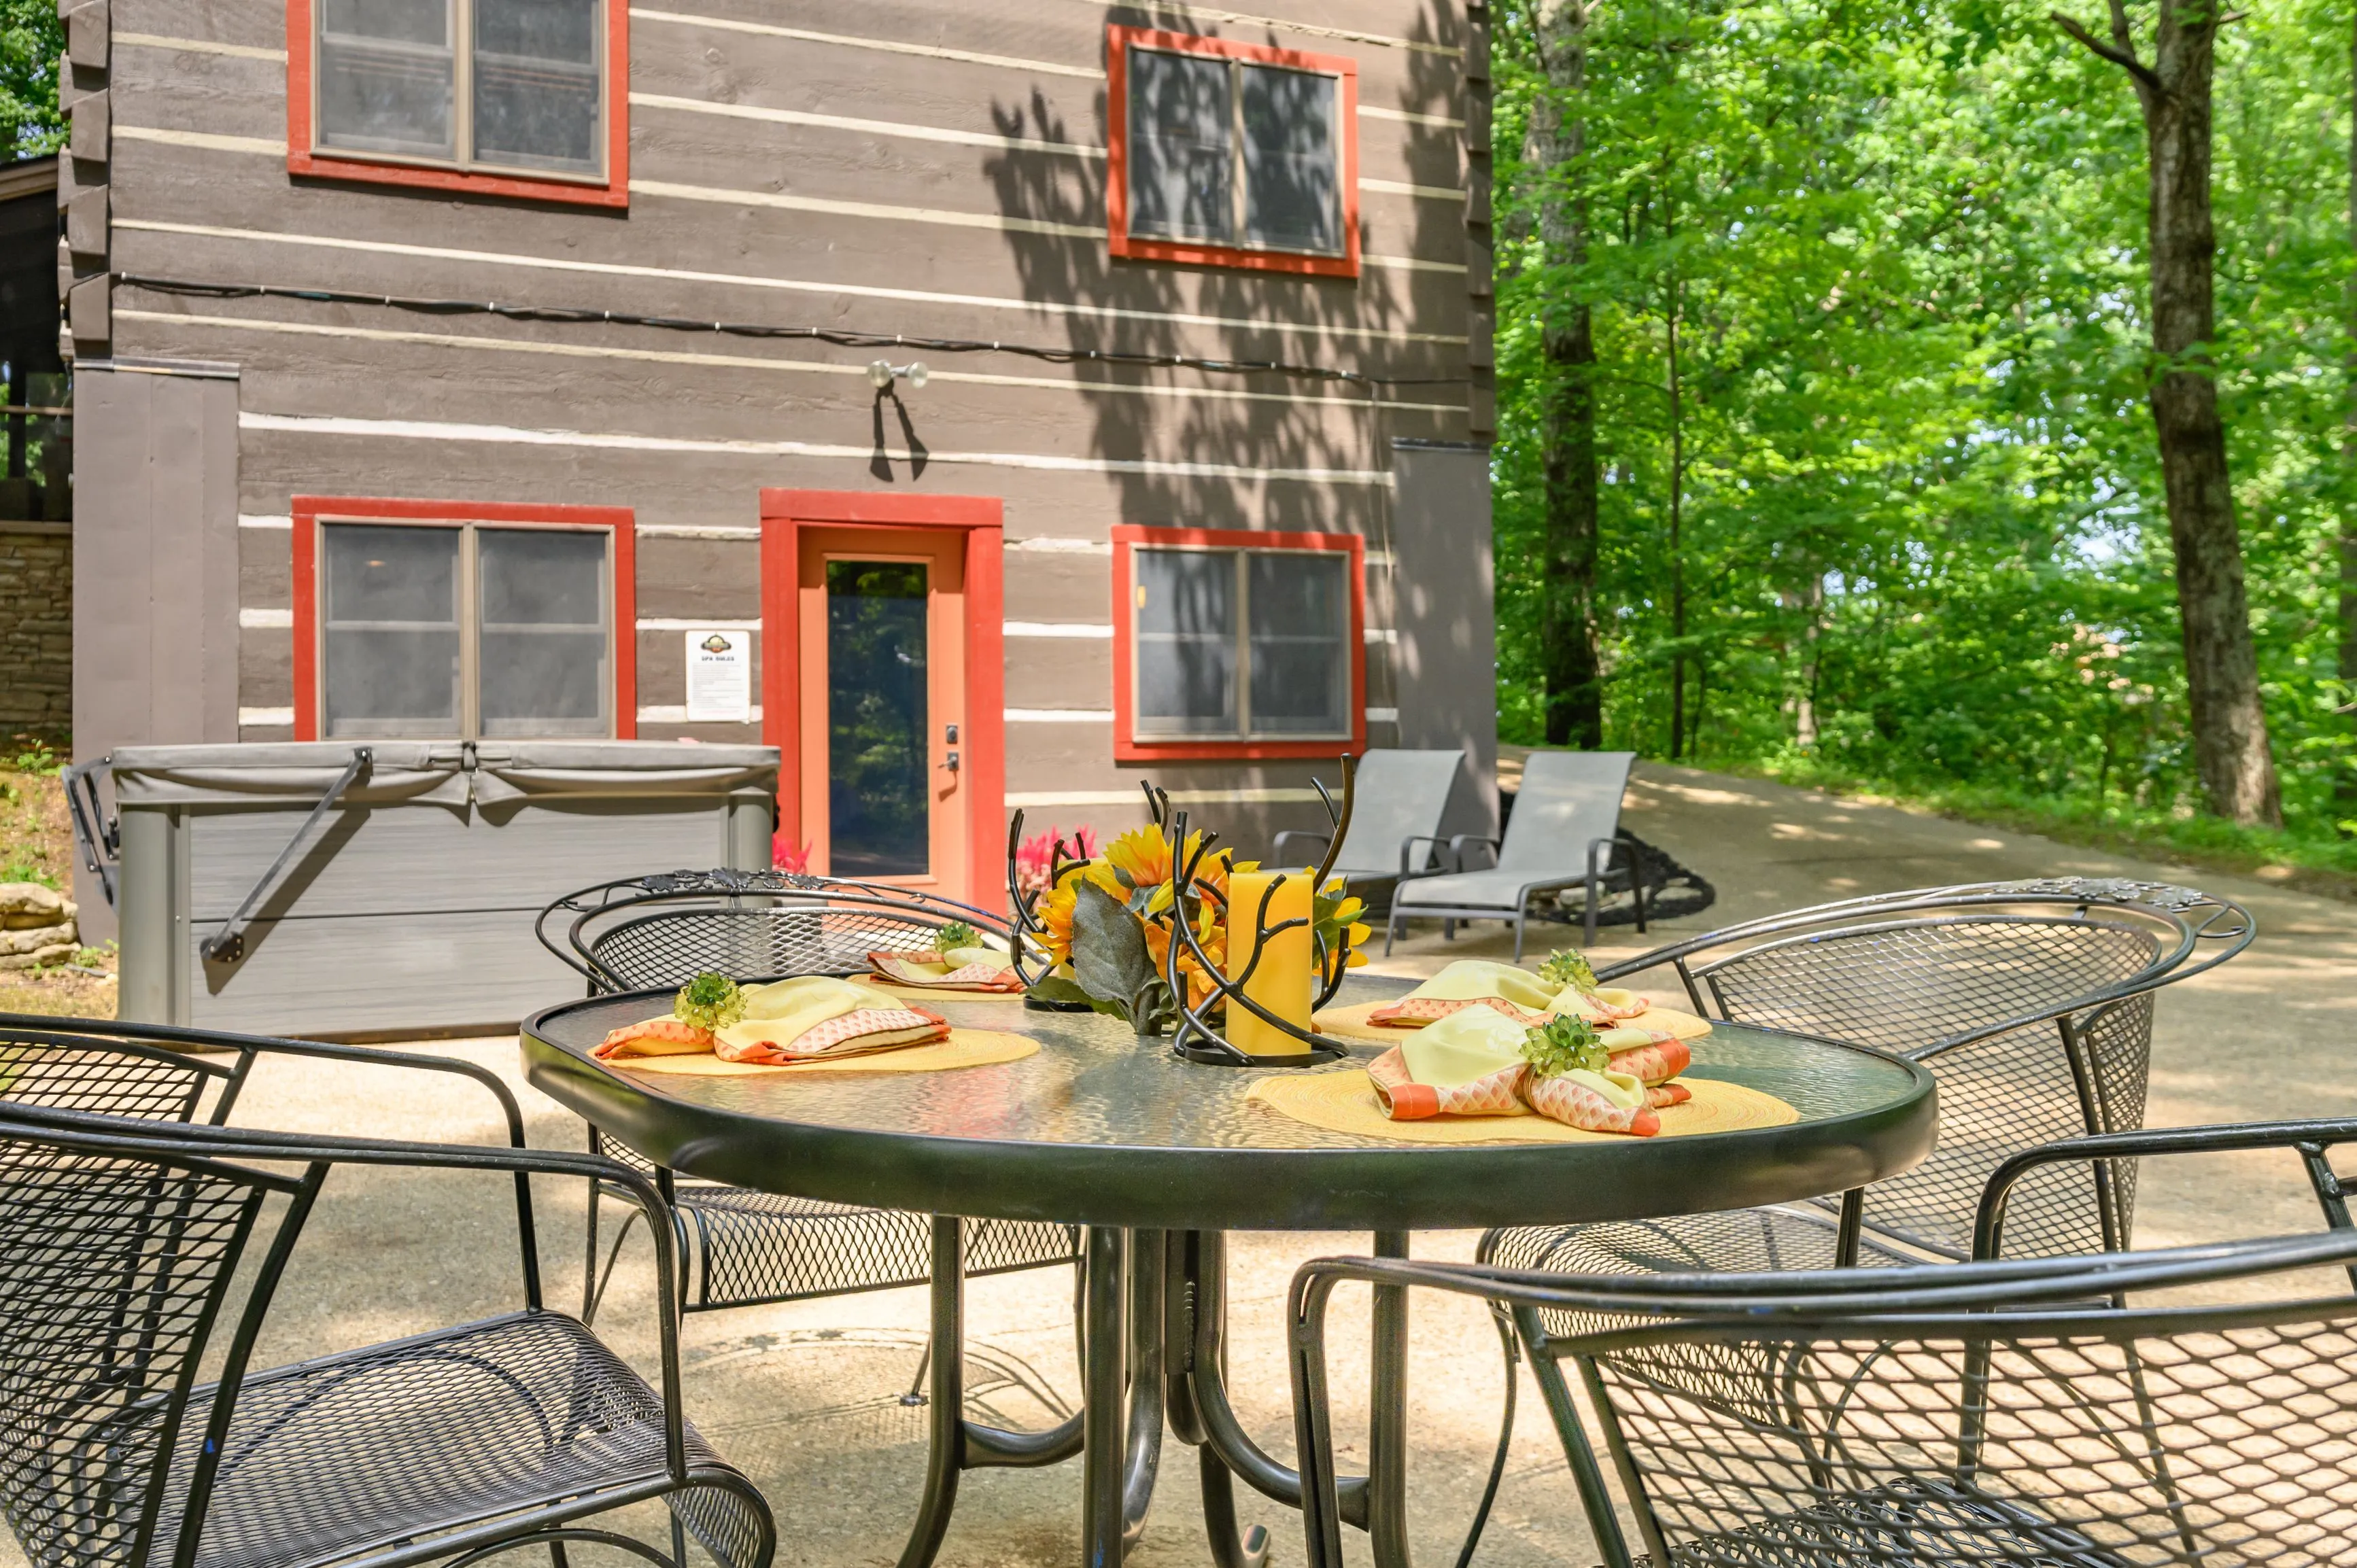 Outdoor patio setting with a meal prepared on a table, in front of a two-story house with red accents and surrounded by green trees.